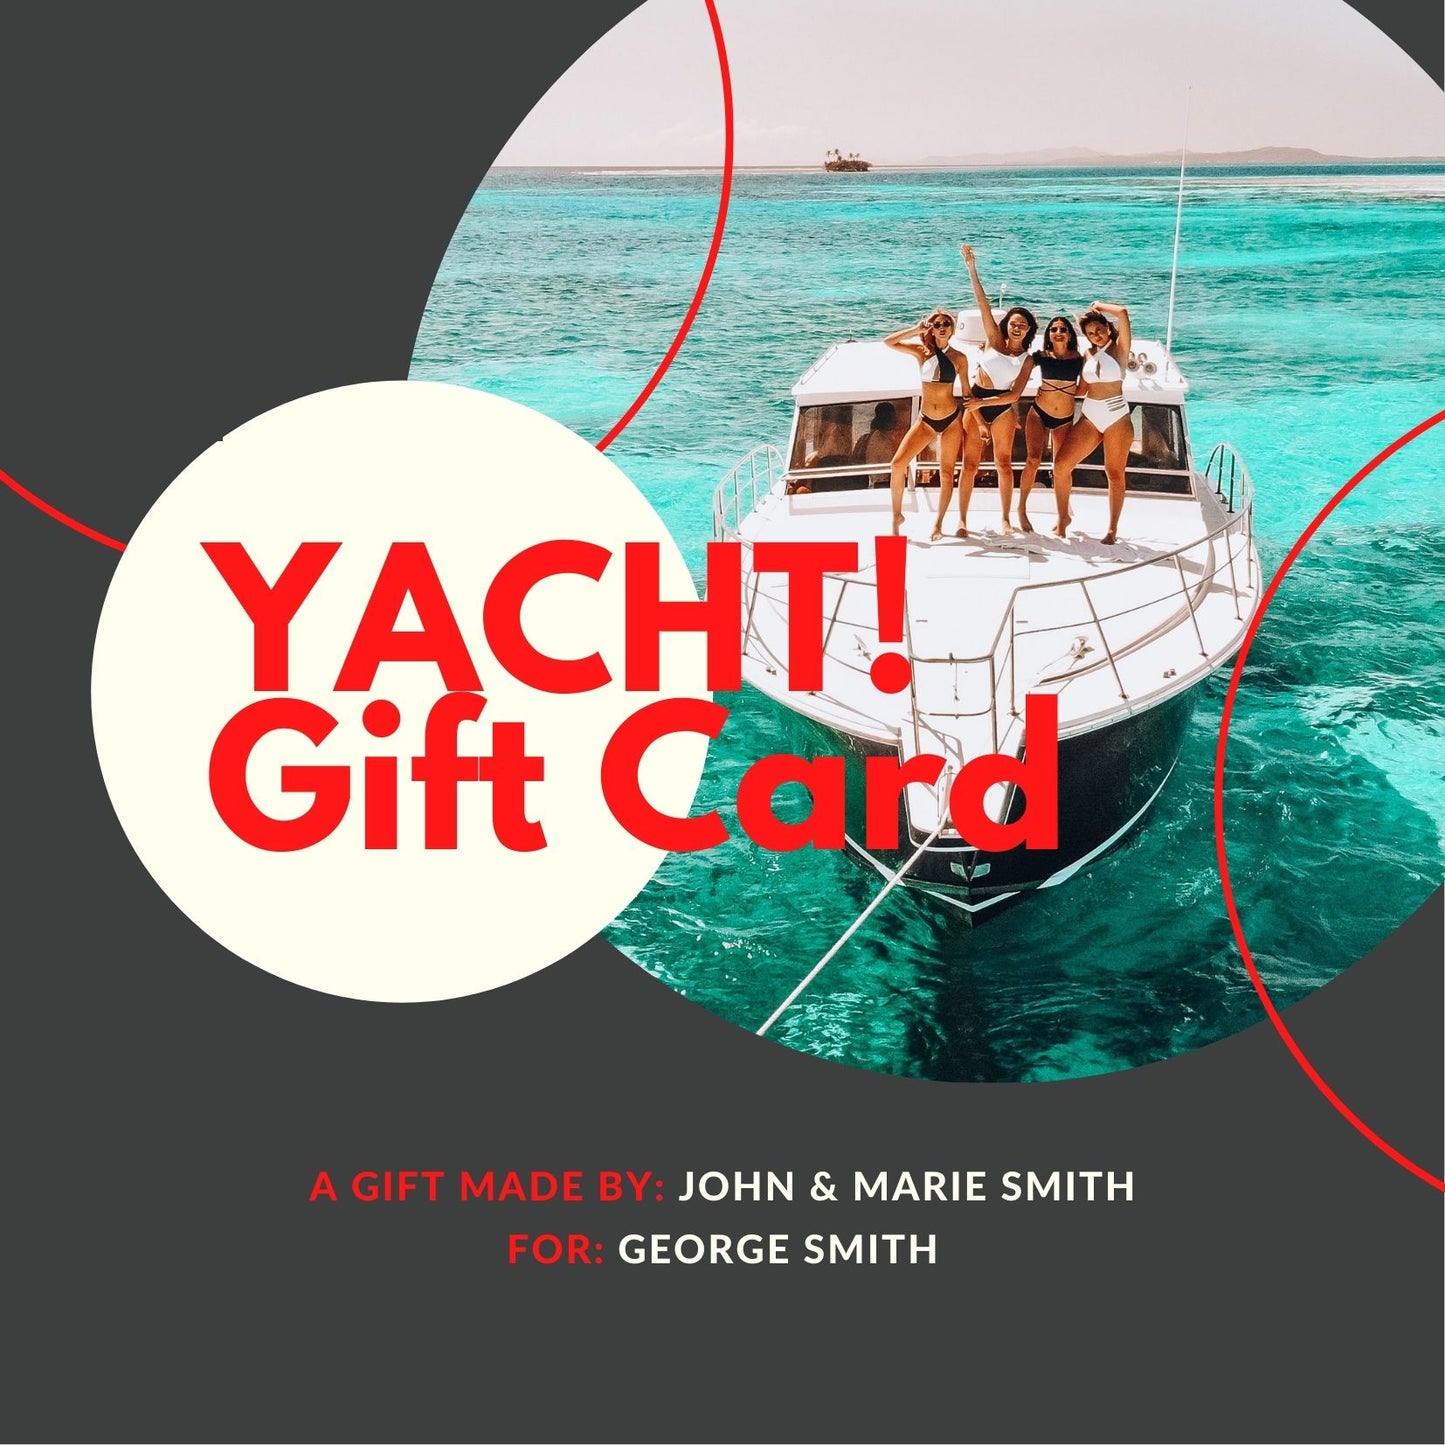 YACHT! Gift Card by Global Yacht